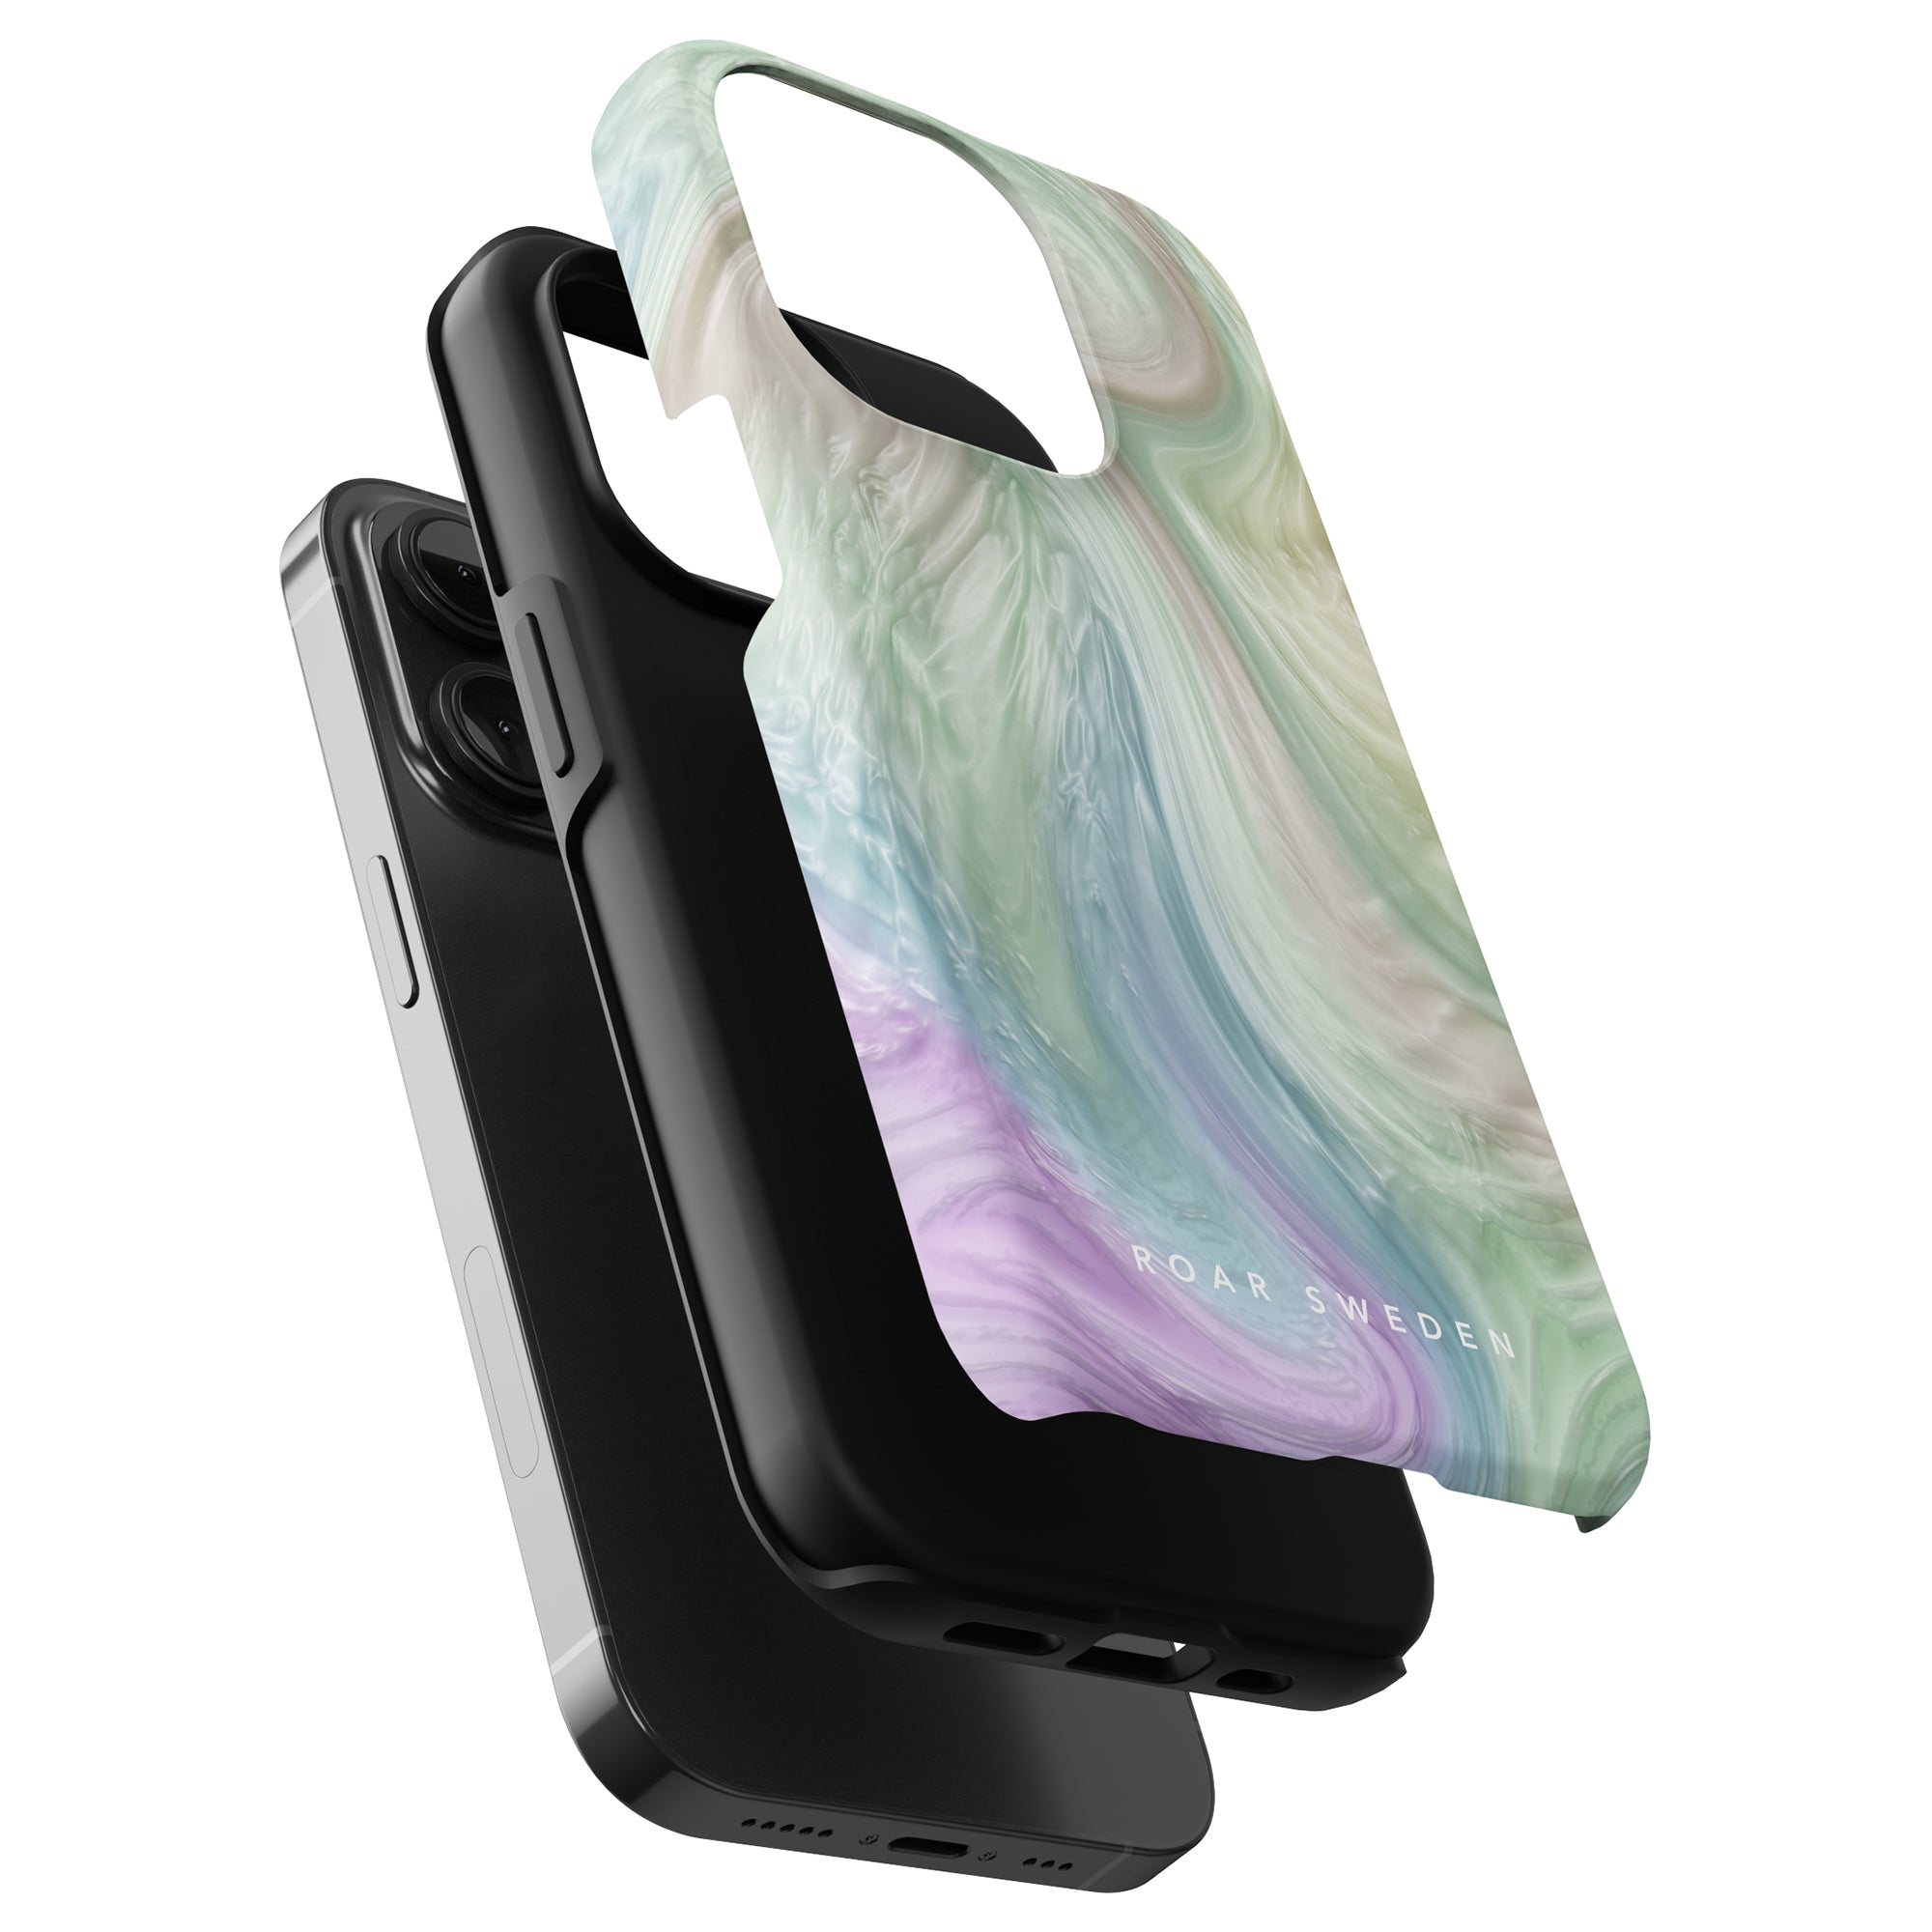 Black and multicolored Nacre - Tough Case smartphone cases displayed from the side with a visible logo "roar sweden" on the colorful case.